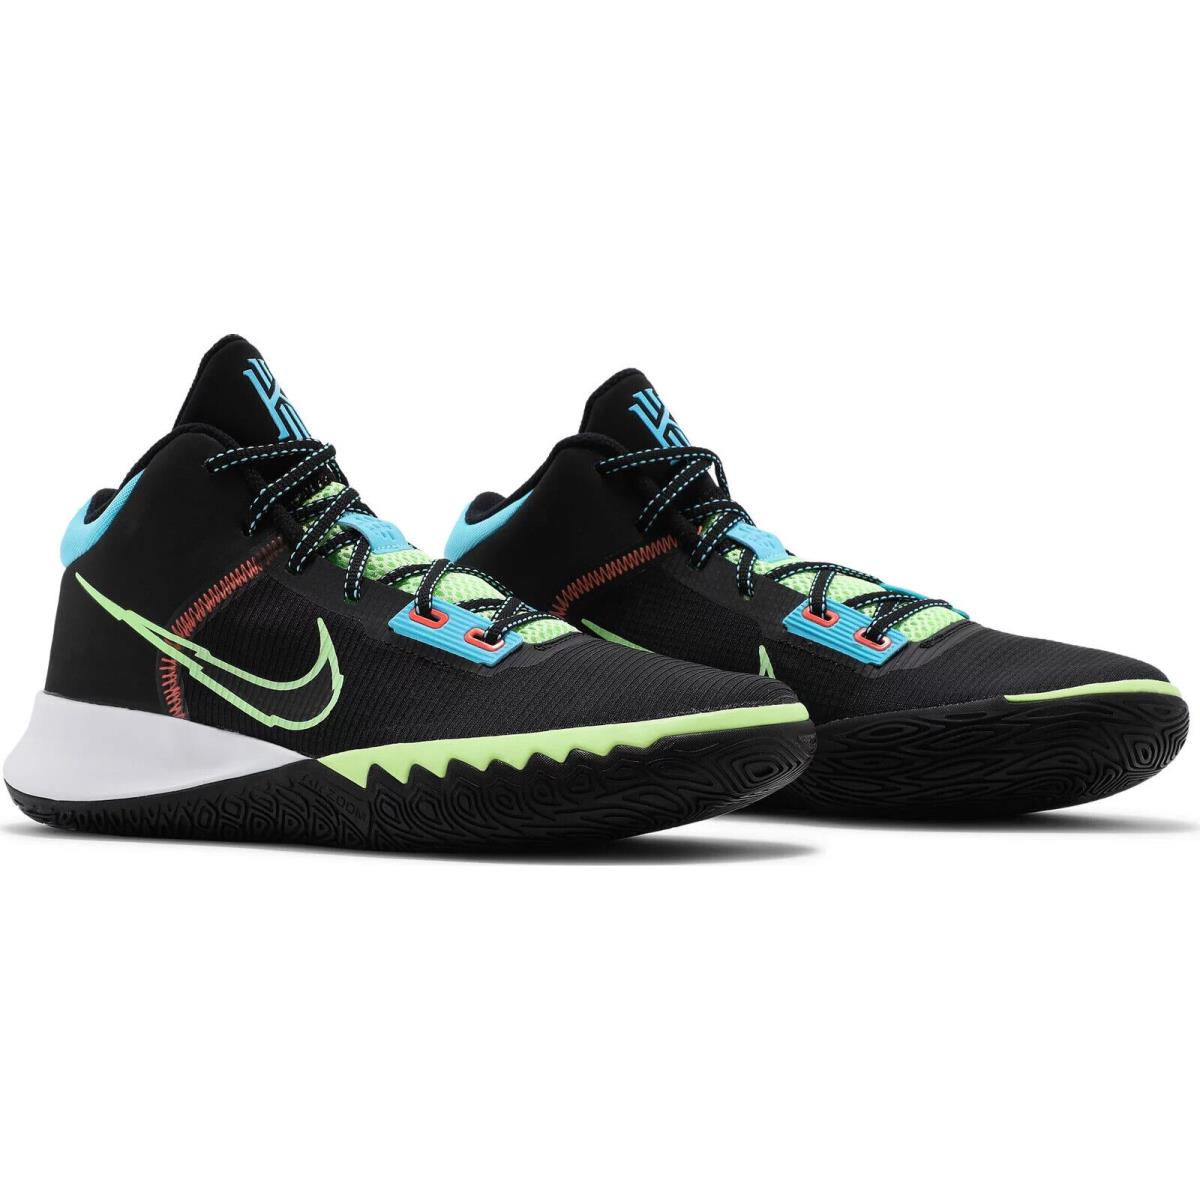 Nike Kyrie Flytrap 4 CT1972-003 Men Black Lime Glow Athletic Running Shoes DC319 - Black Lime Glow